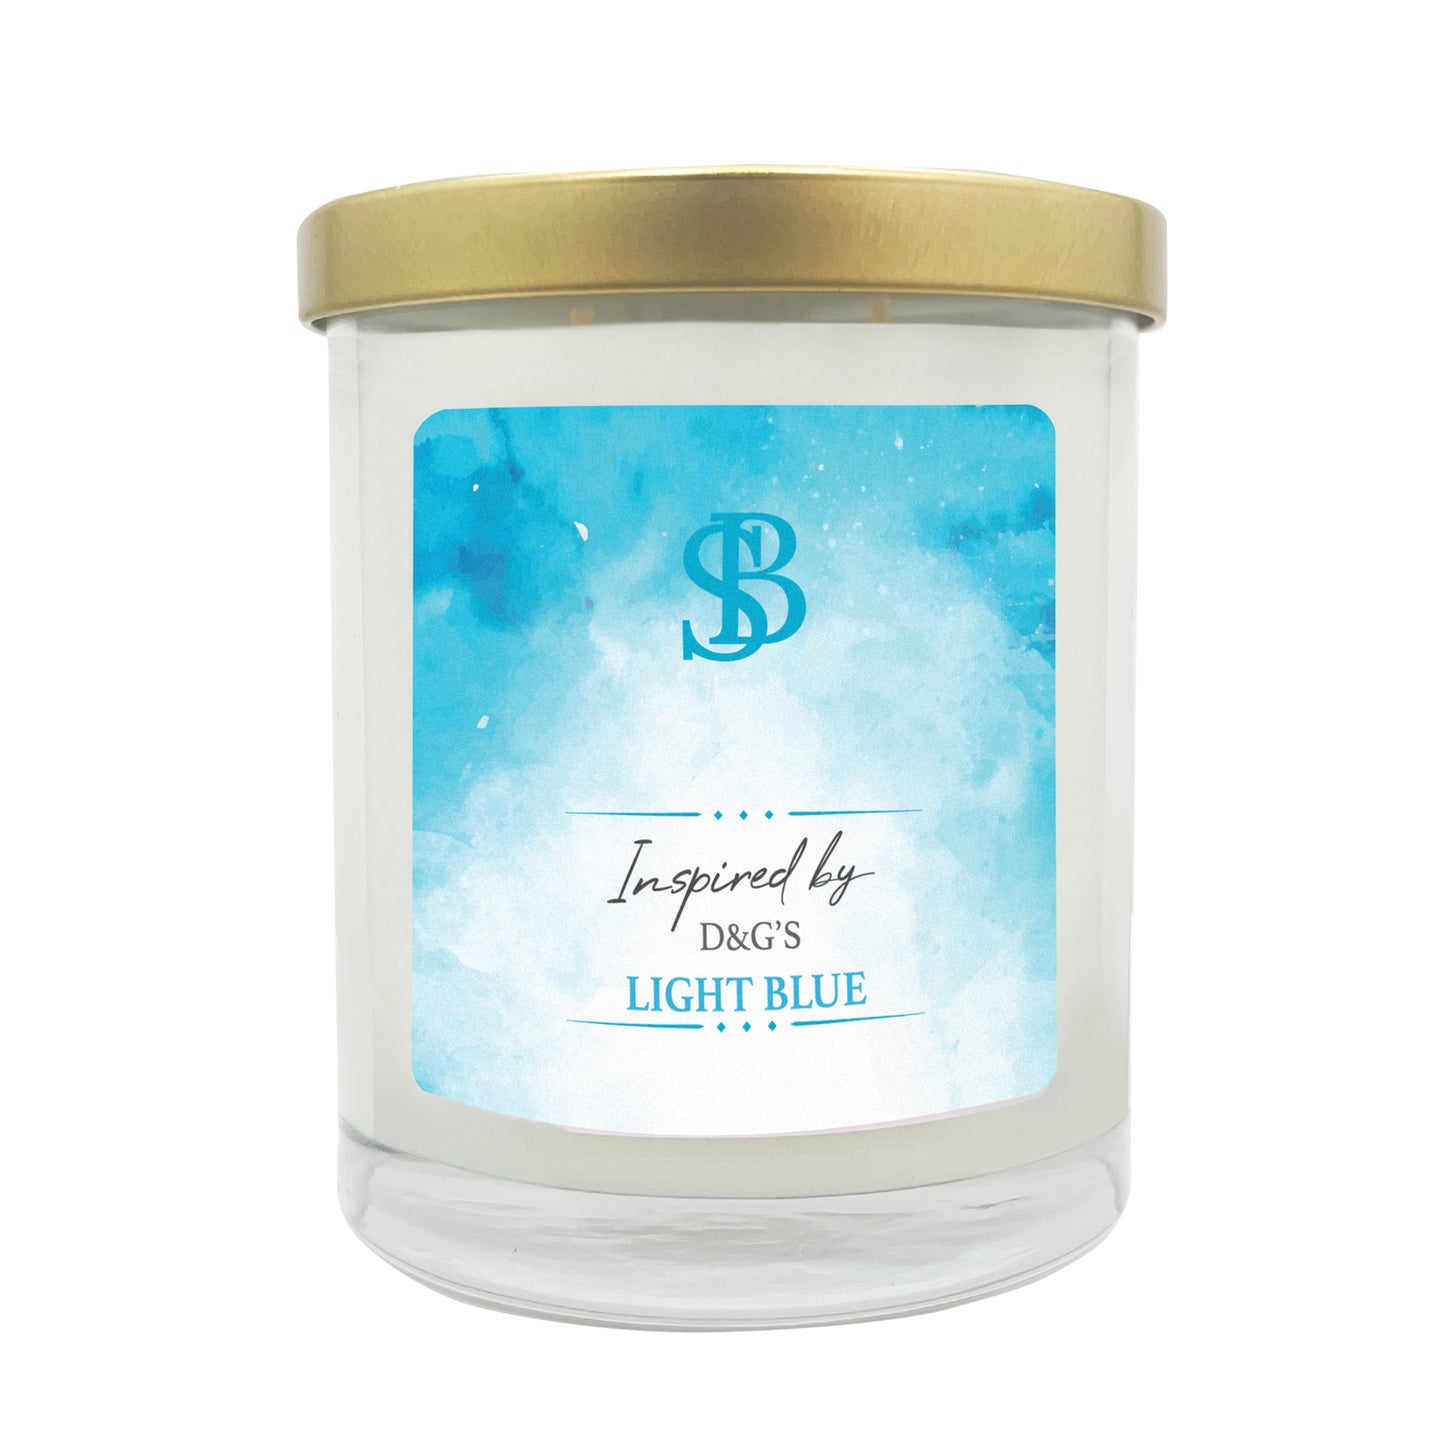 INSPIRED BY D&G'S LIGHT BLUE | Soy Scented Candle 11 oz